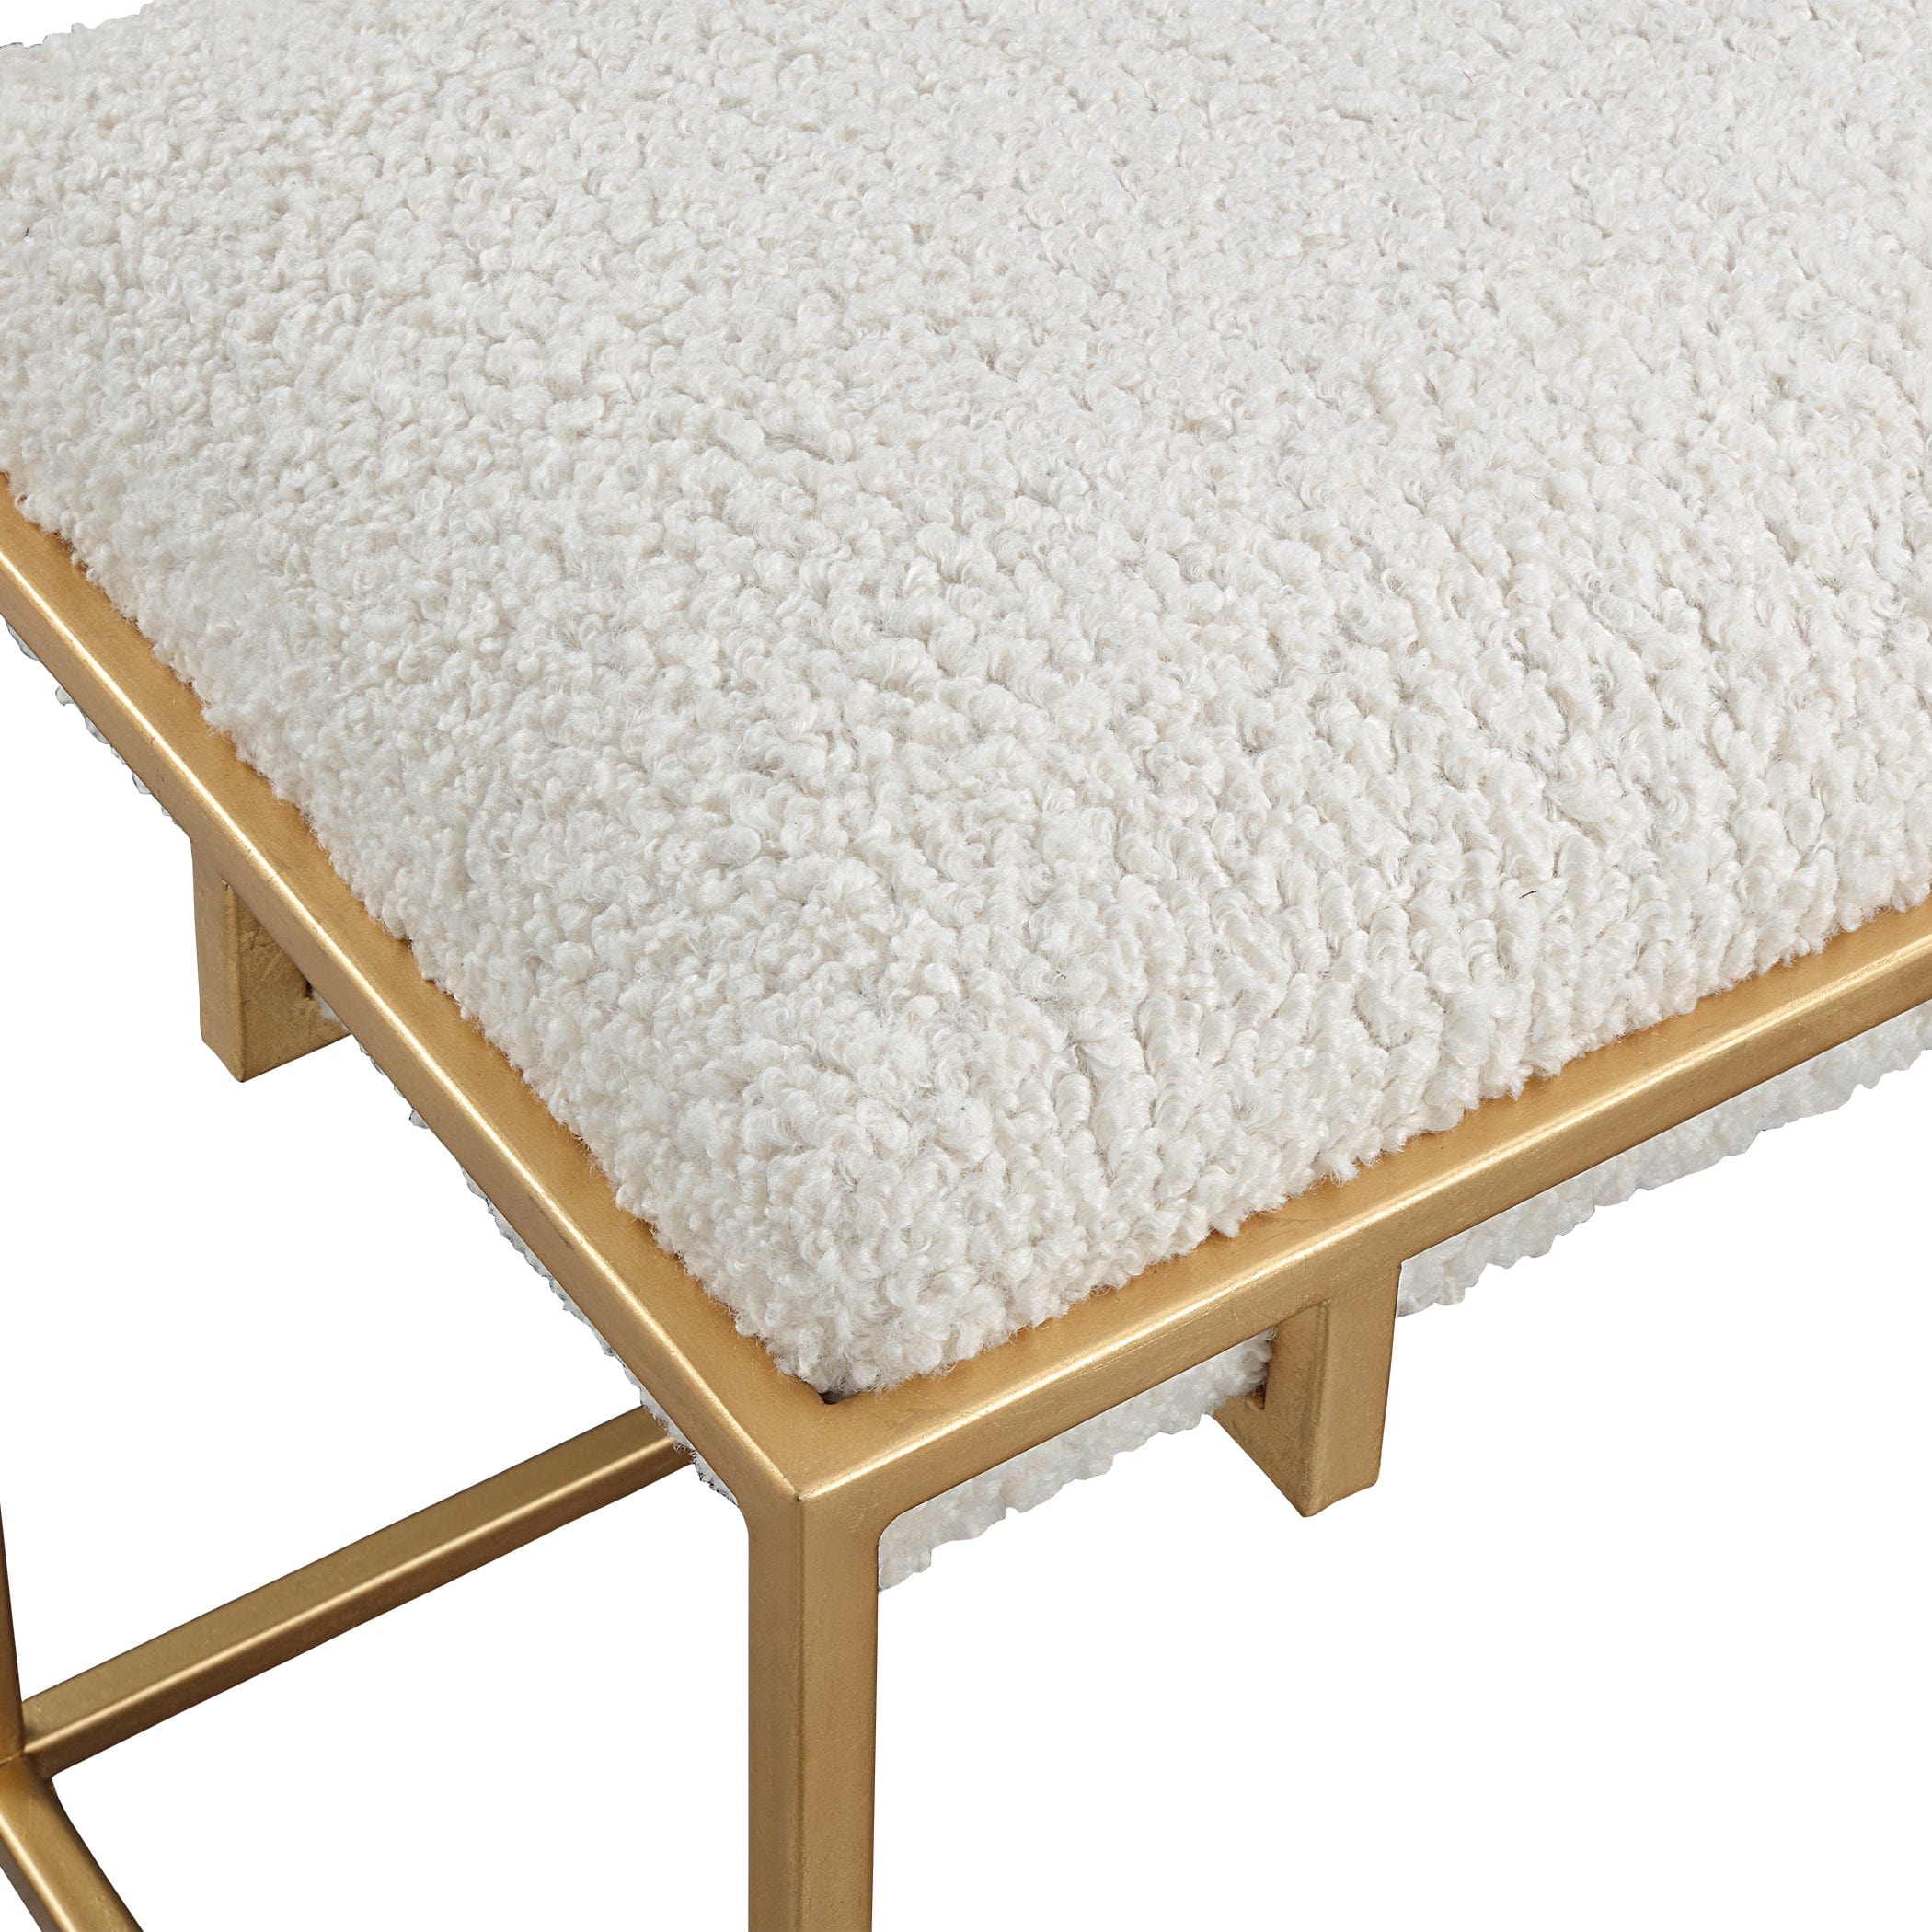 Paradox Small Gold & White Shearling Bench Uttermost